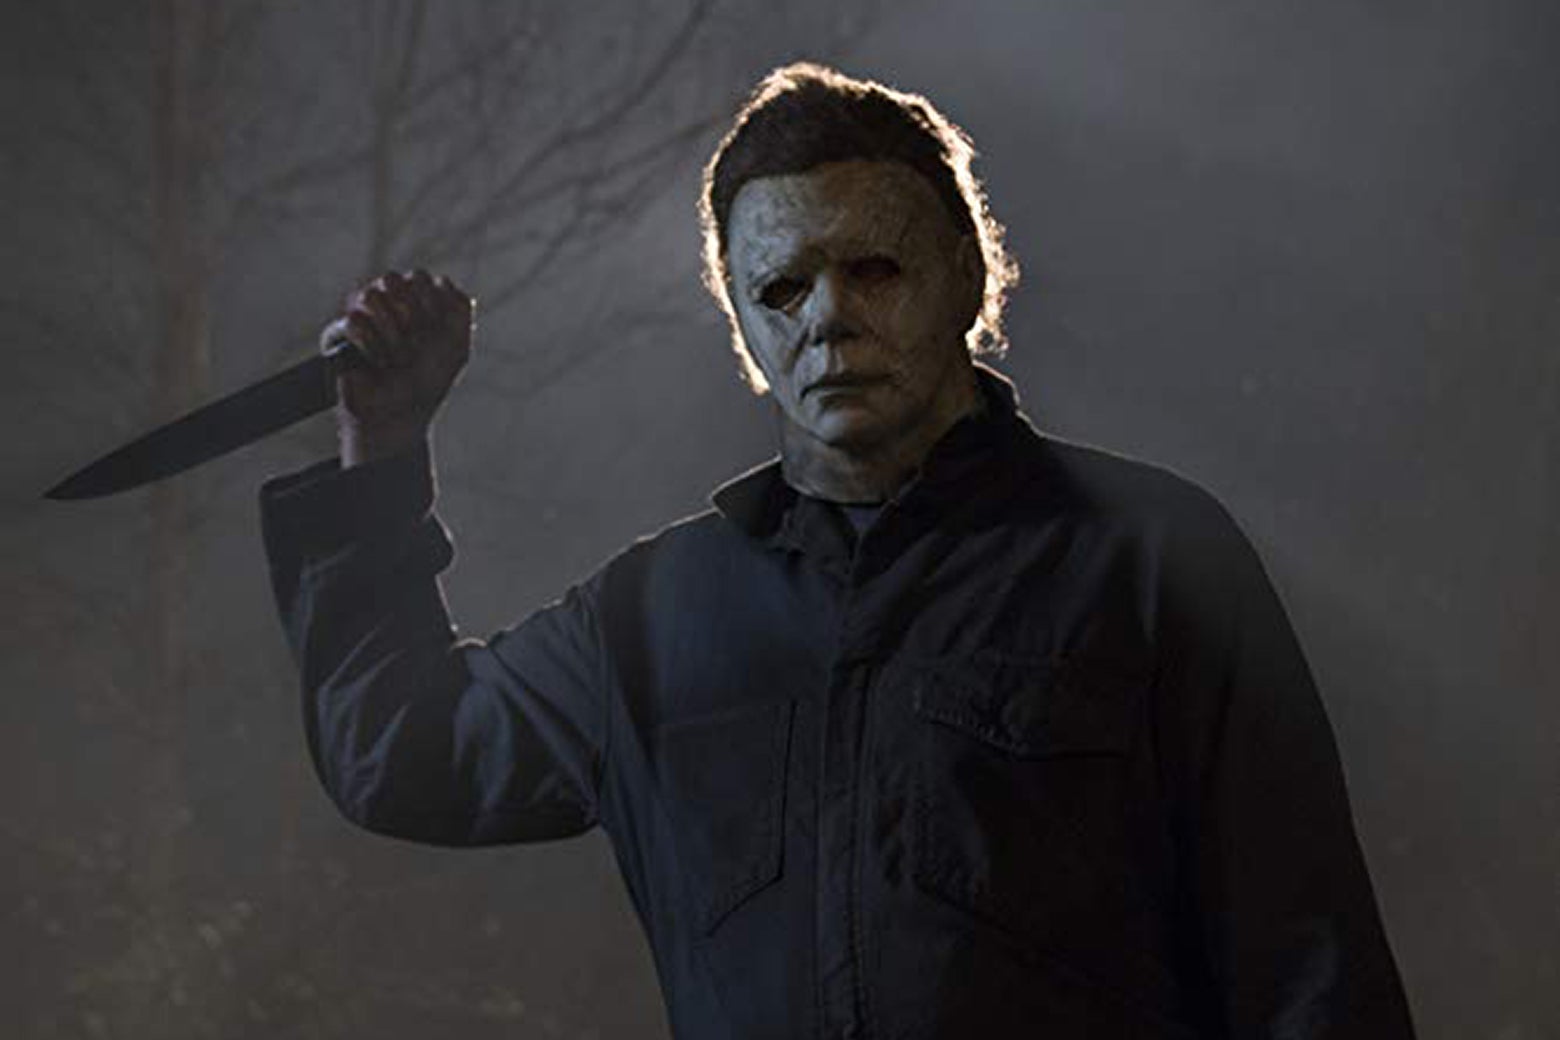 Michael Myers brandishes a butcher knife.